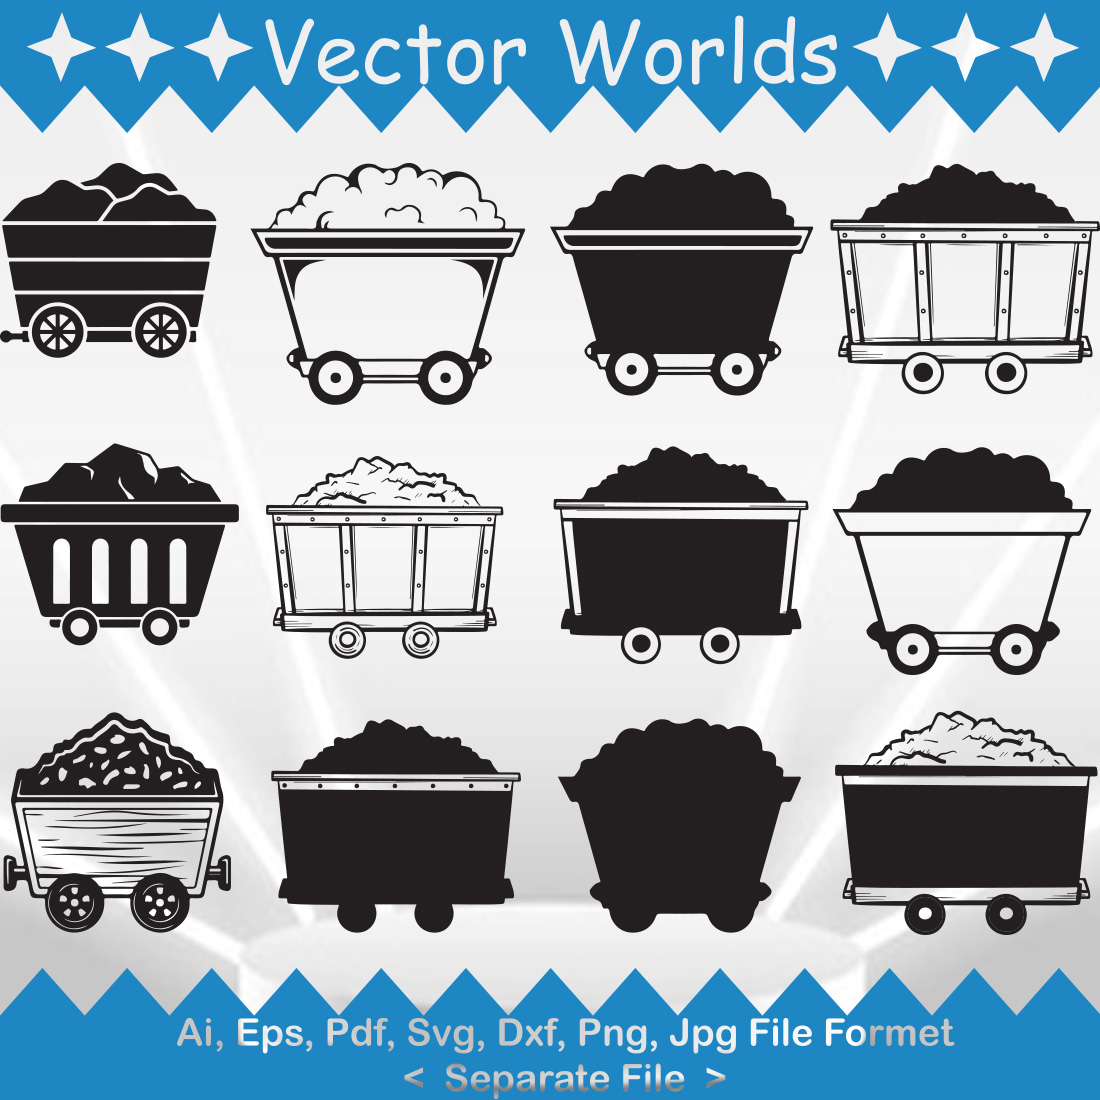 Mining Cart SVG Vector Design cover image.